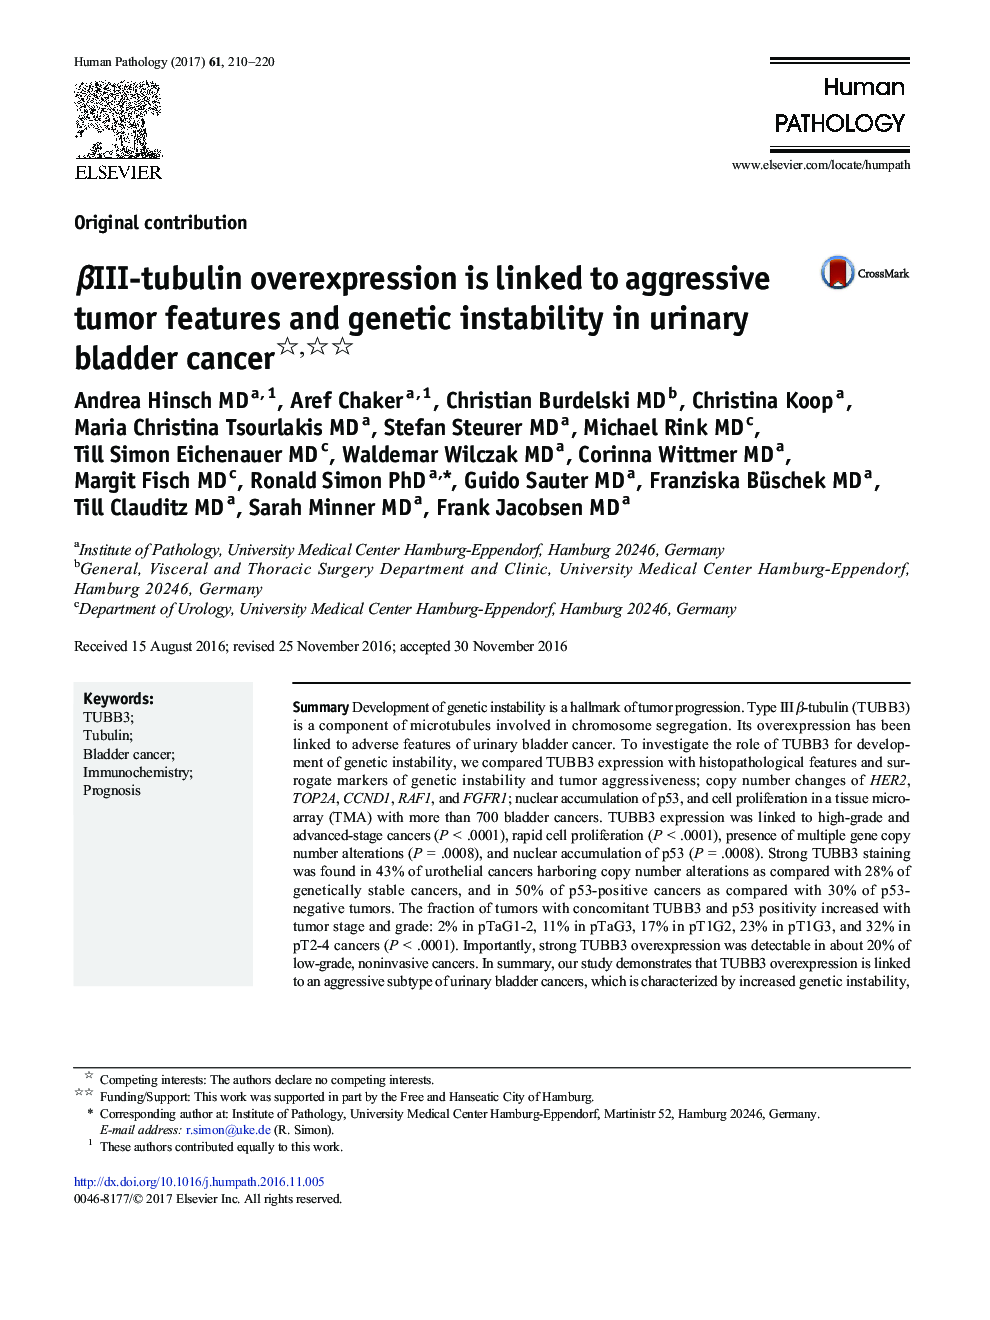 Original contributionÎ²III-tubulin overexpression is linked to aggressive tumor features and genetic instability in urinary bladder cancer